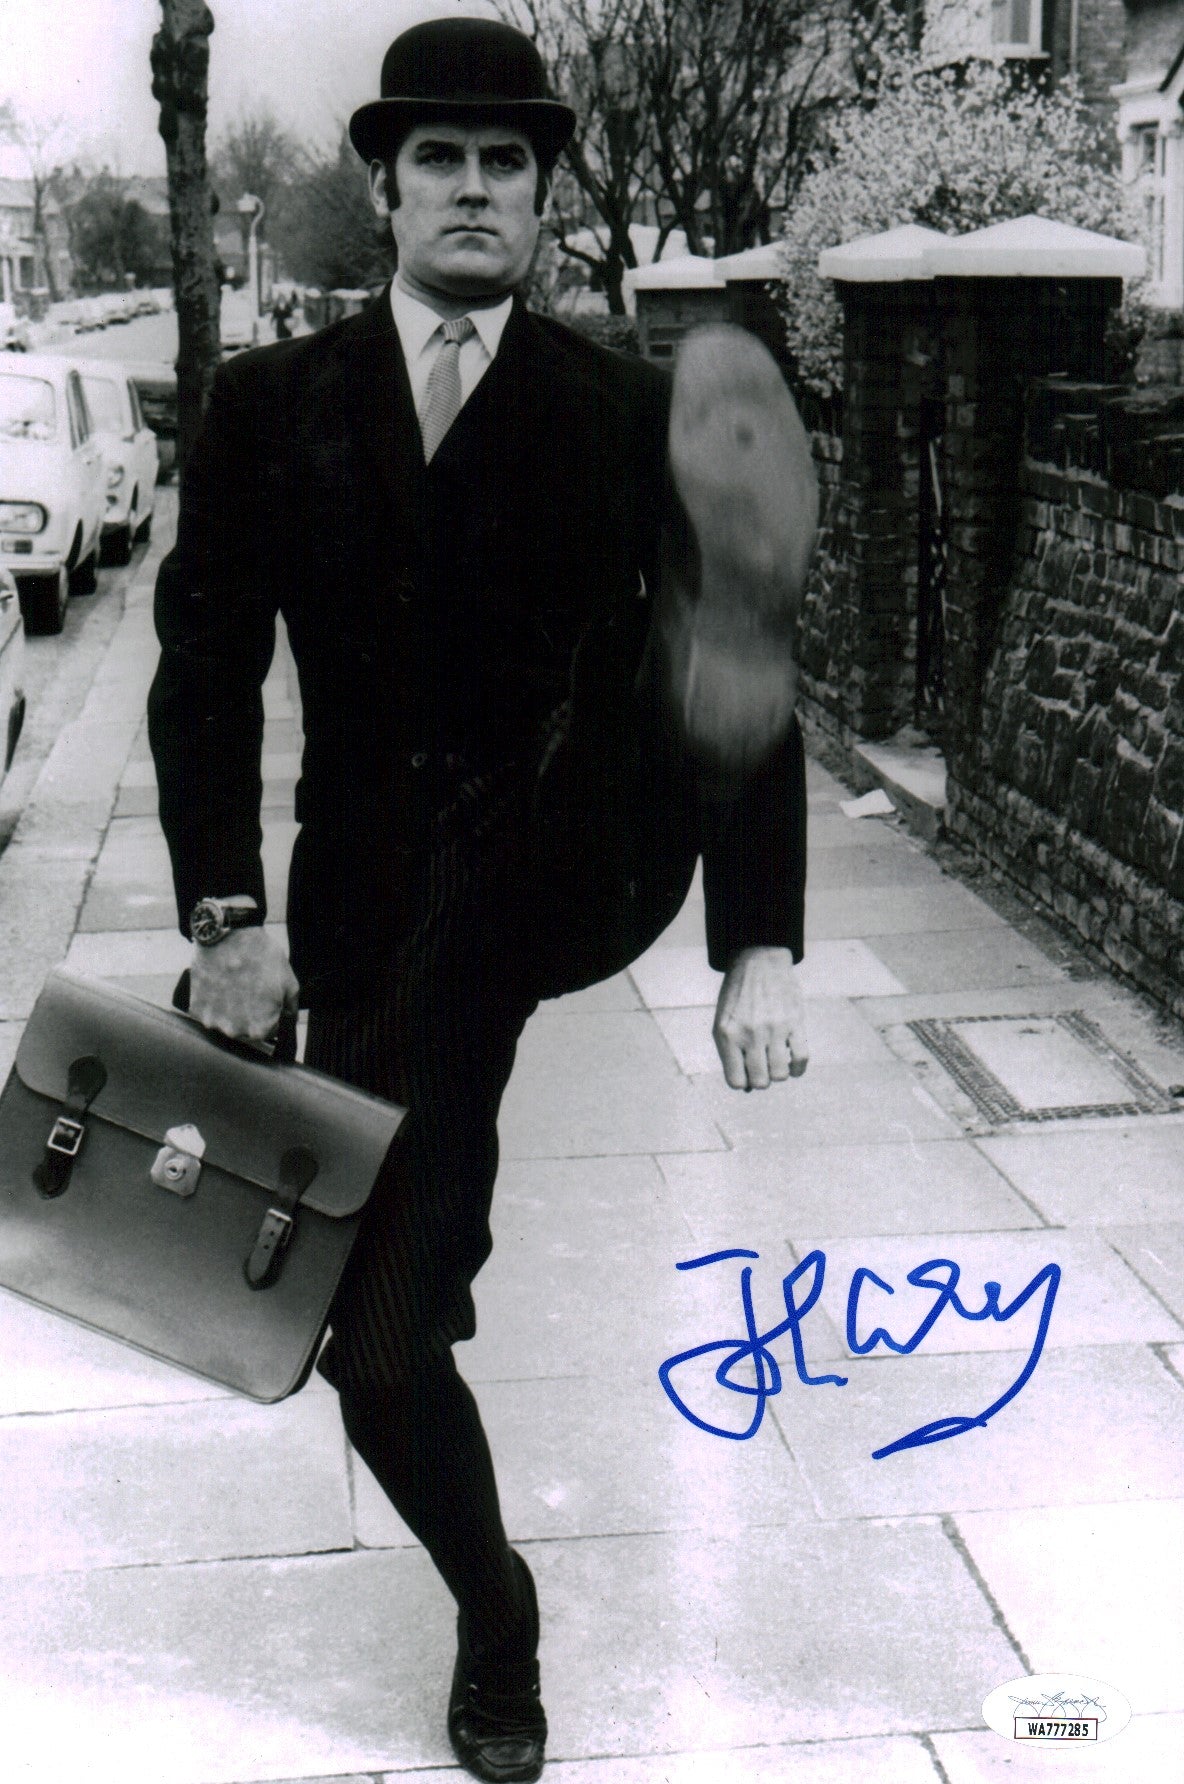 John Cleese Monty Python's Flying Circus 8x12 Signed Photo JSA COA Certified Autograph GalaxyCon